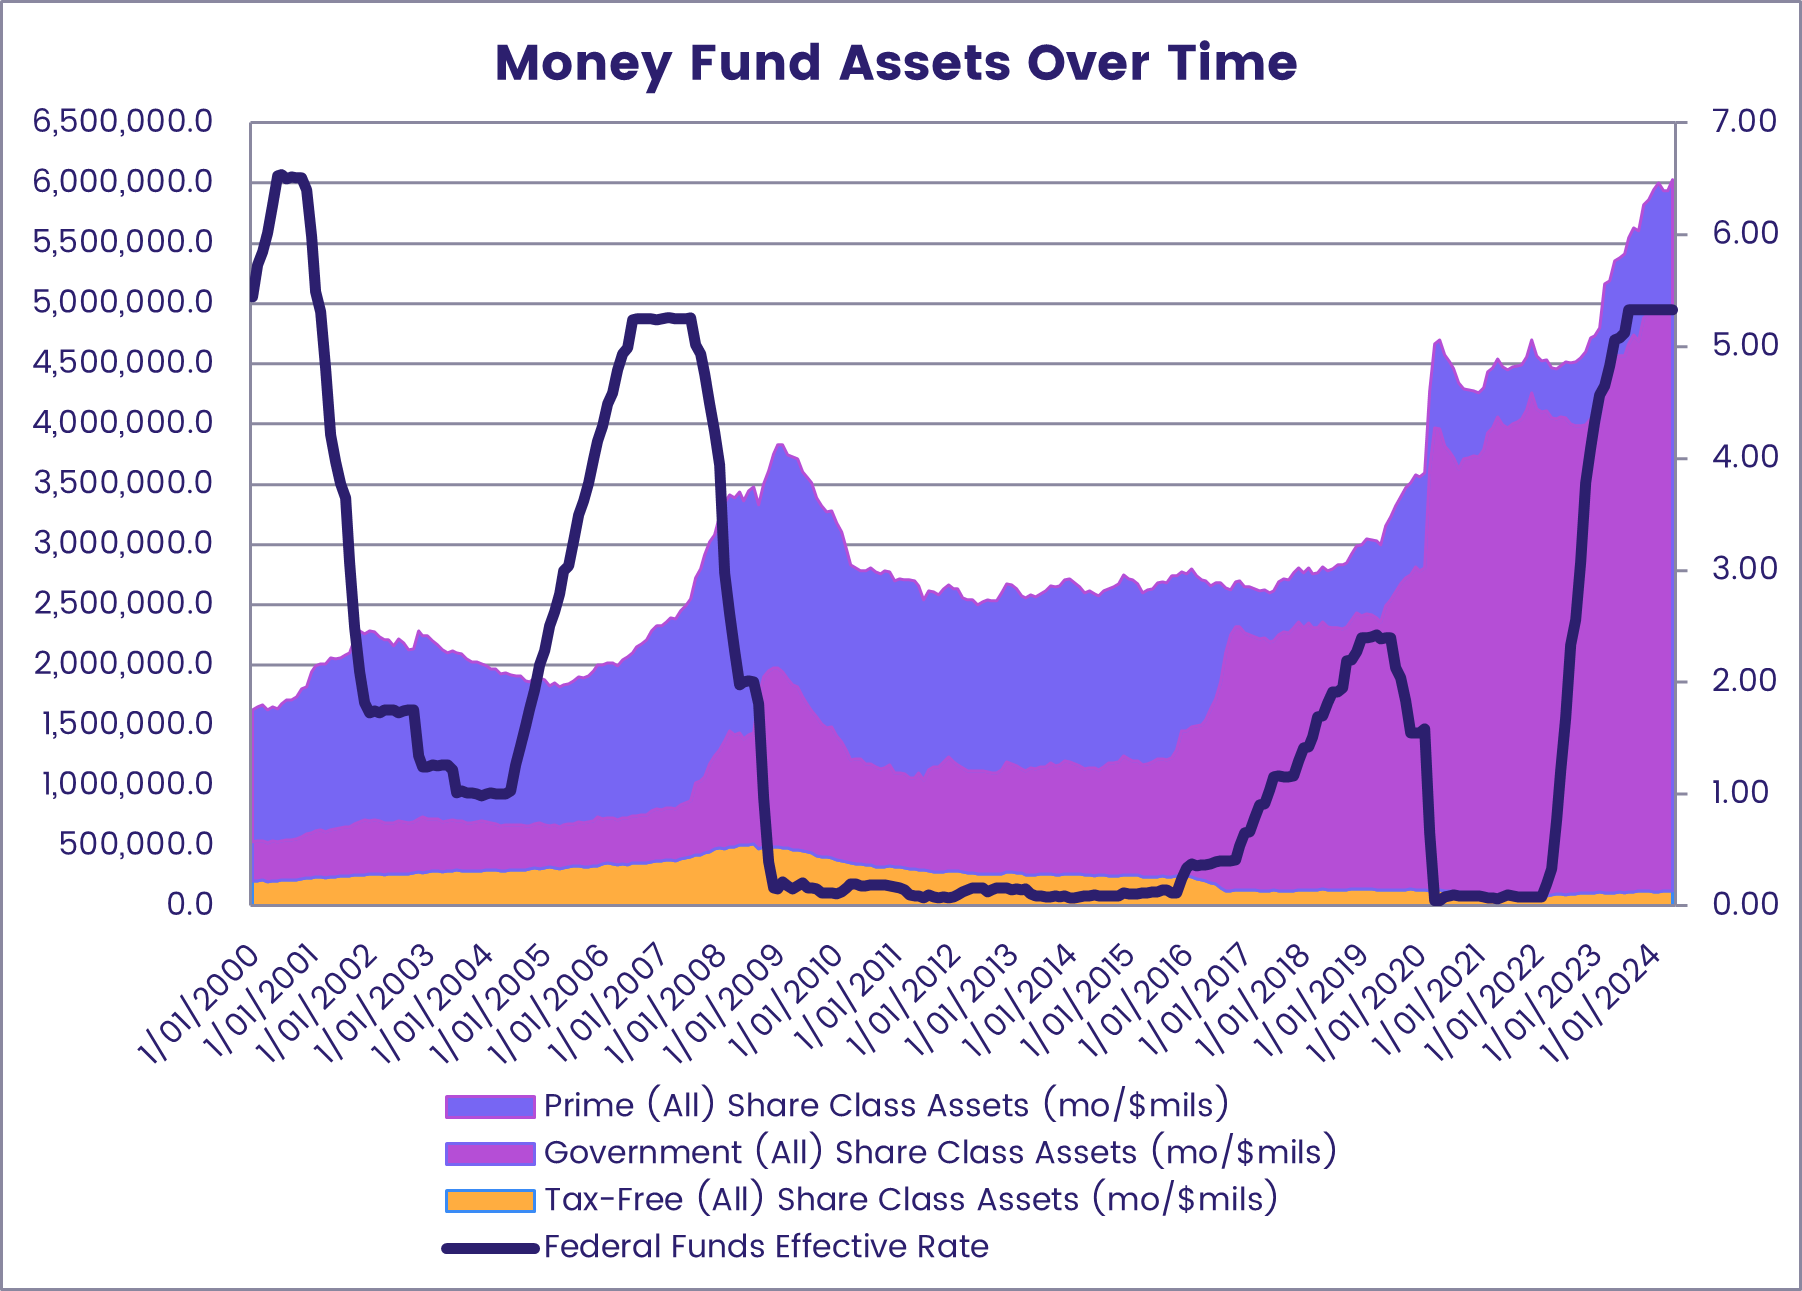 Image of a chart representing the 'Money Fund Assets covering four different categories, including Tax-Free and Government Share Class Assets, from 2000-2024.'